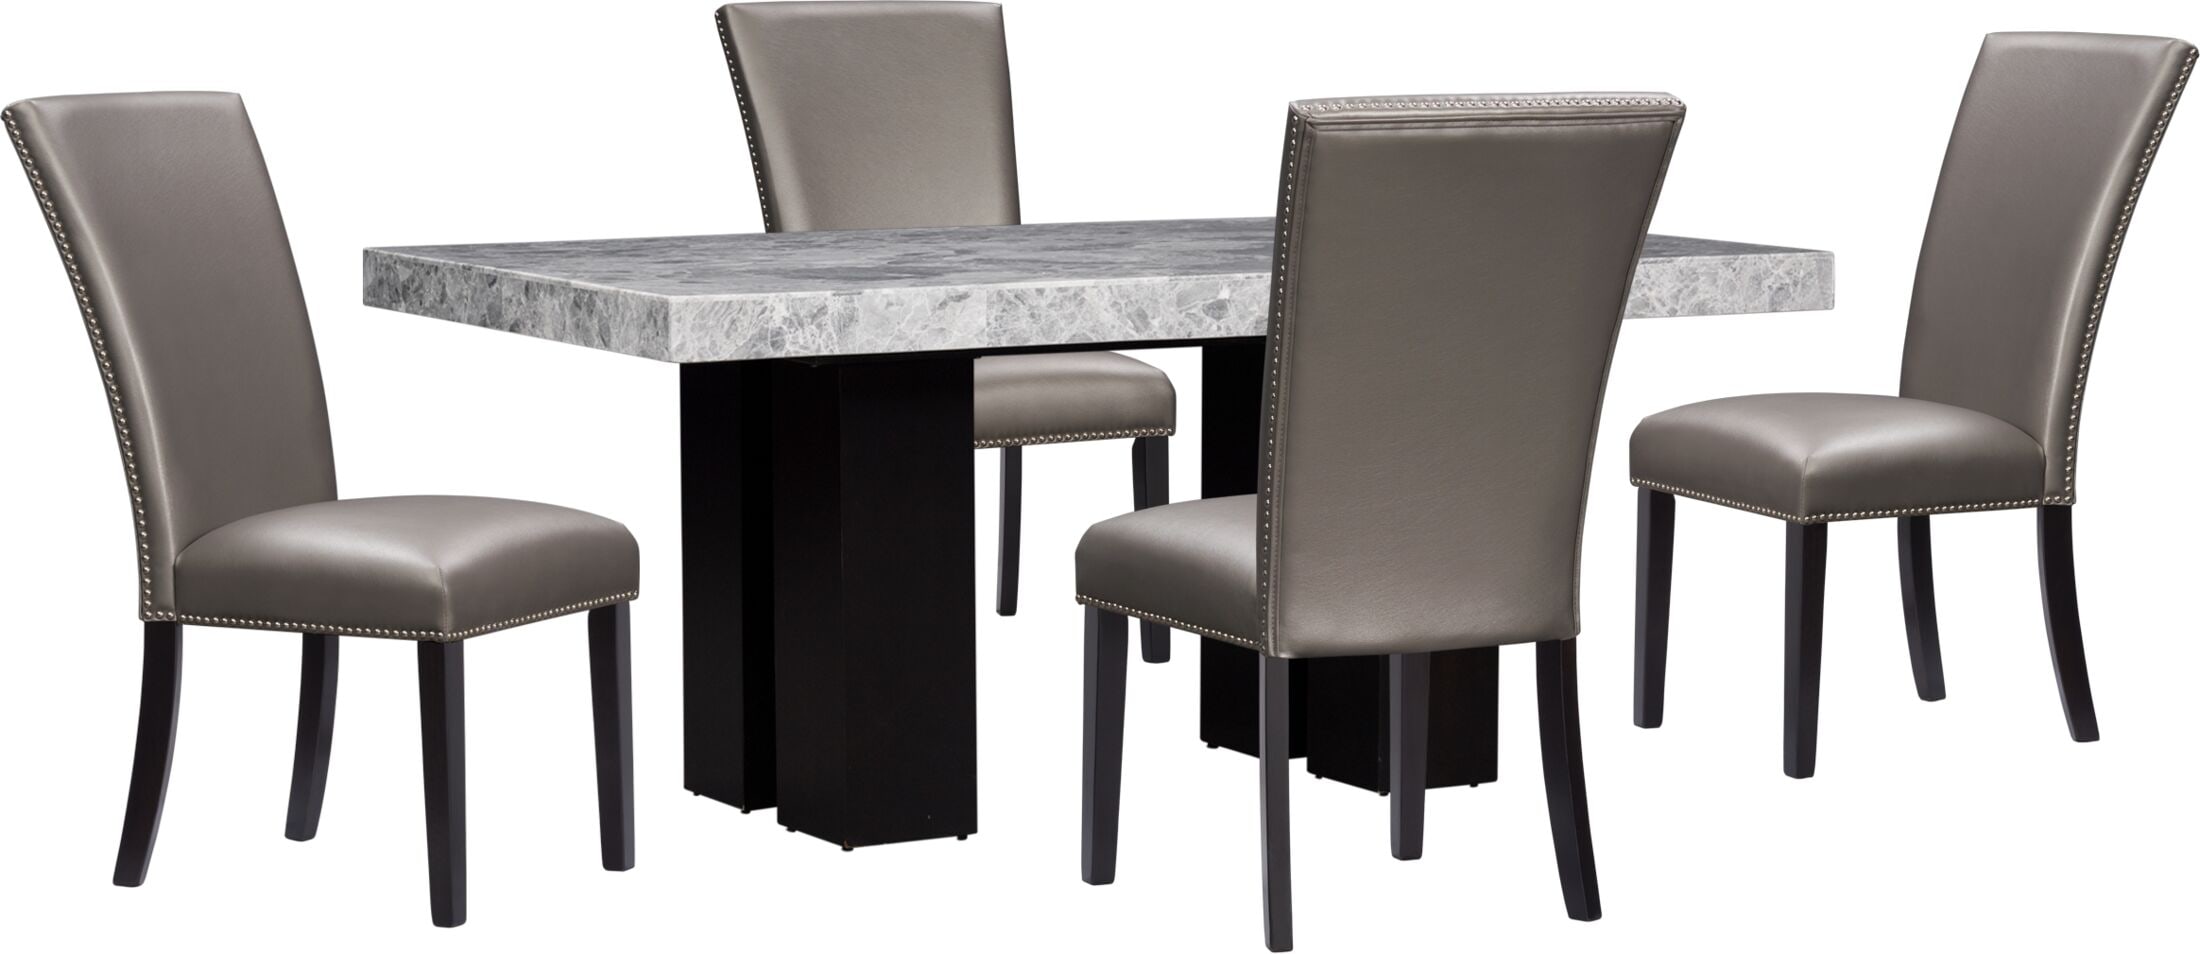 Artemis Marble Dining Table and 4 Upholstered Dining Chairs | American ...